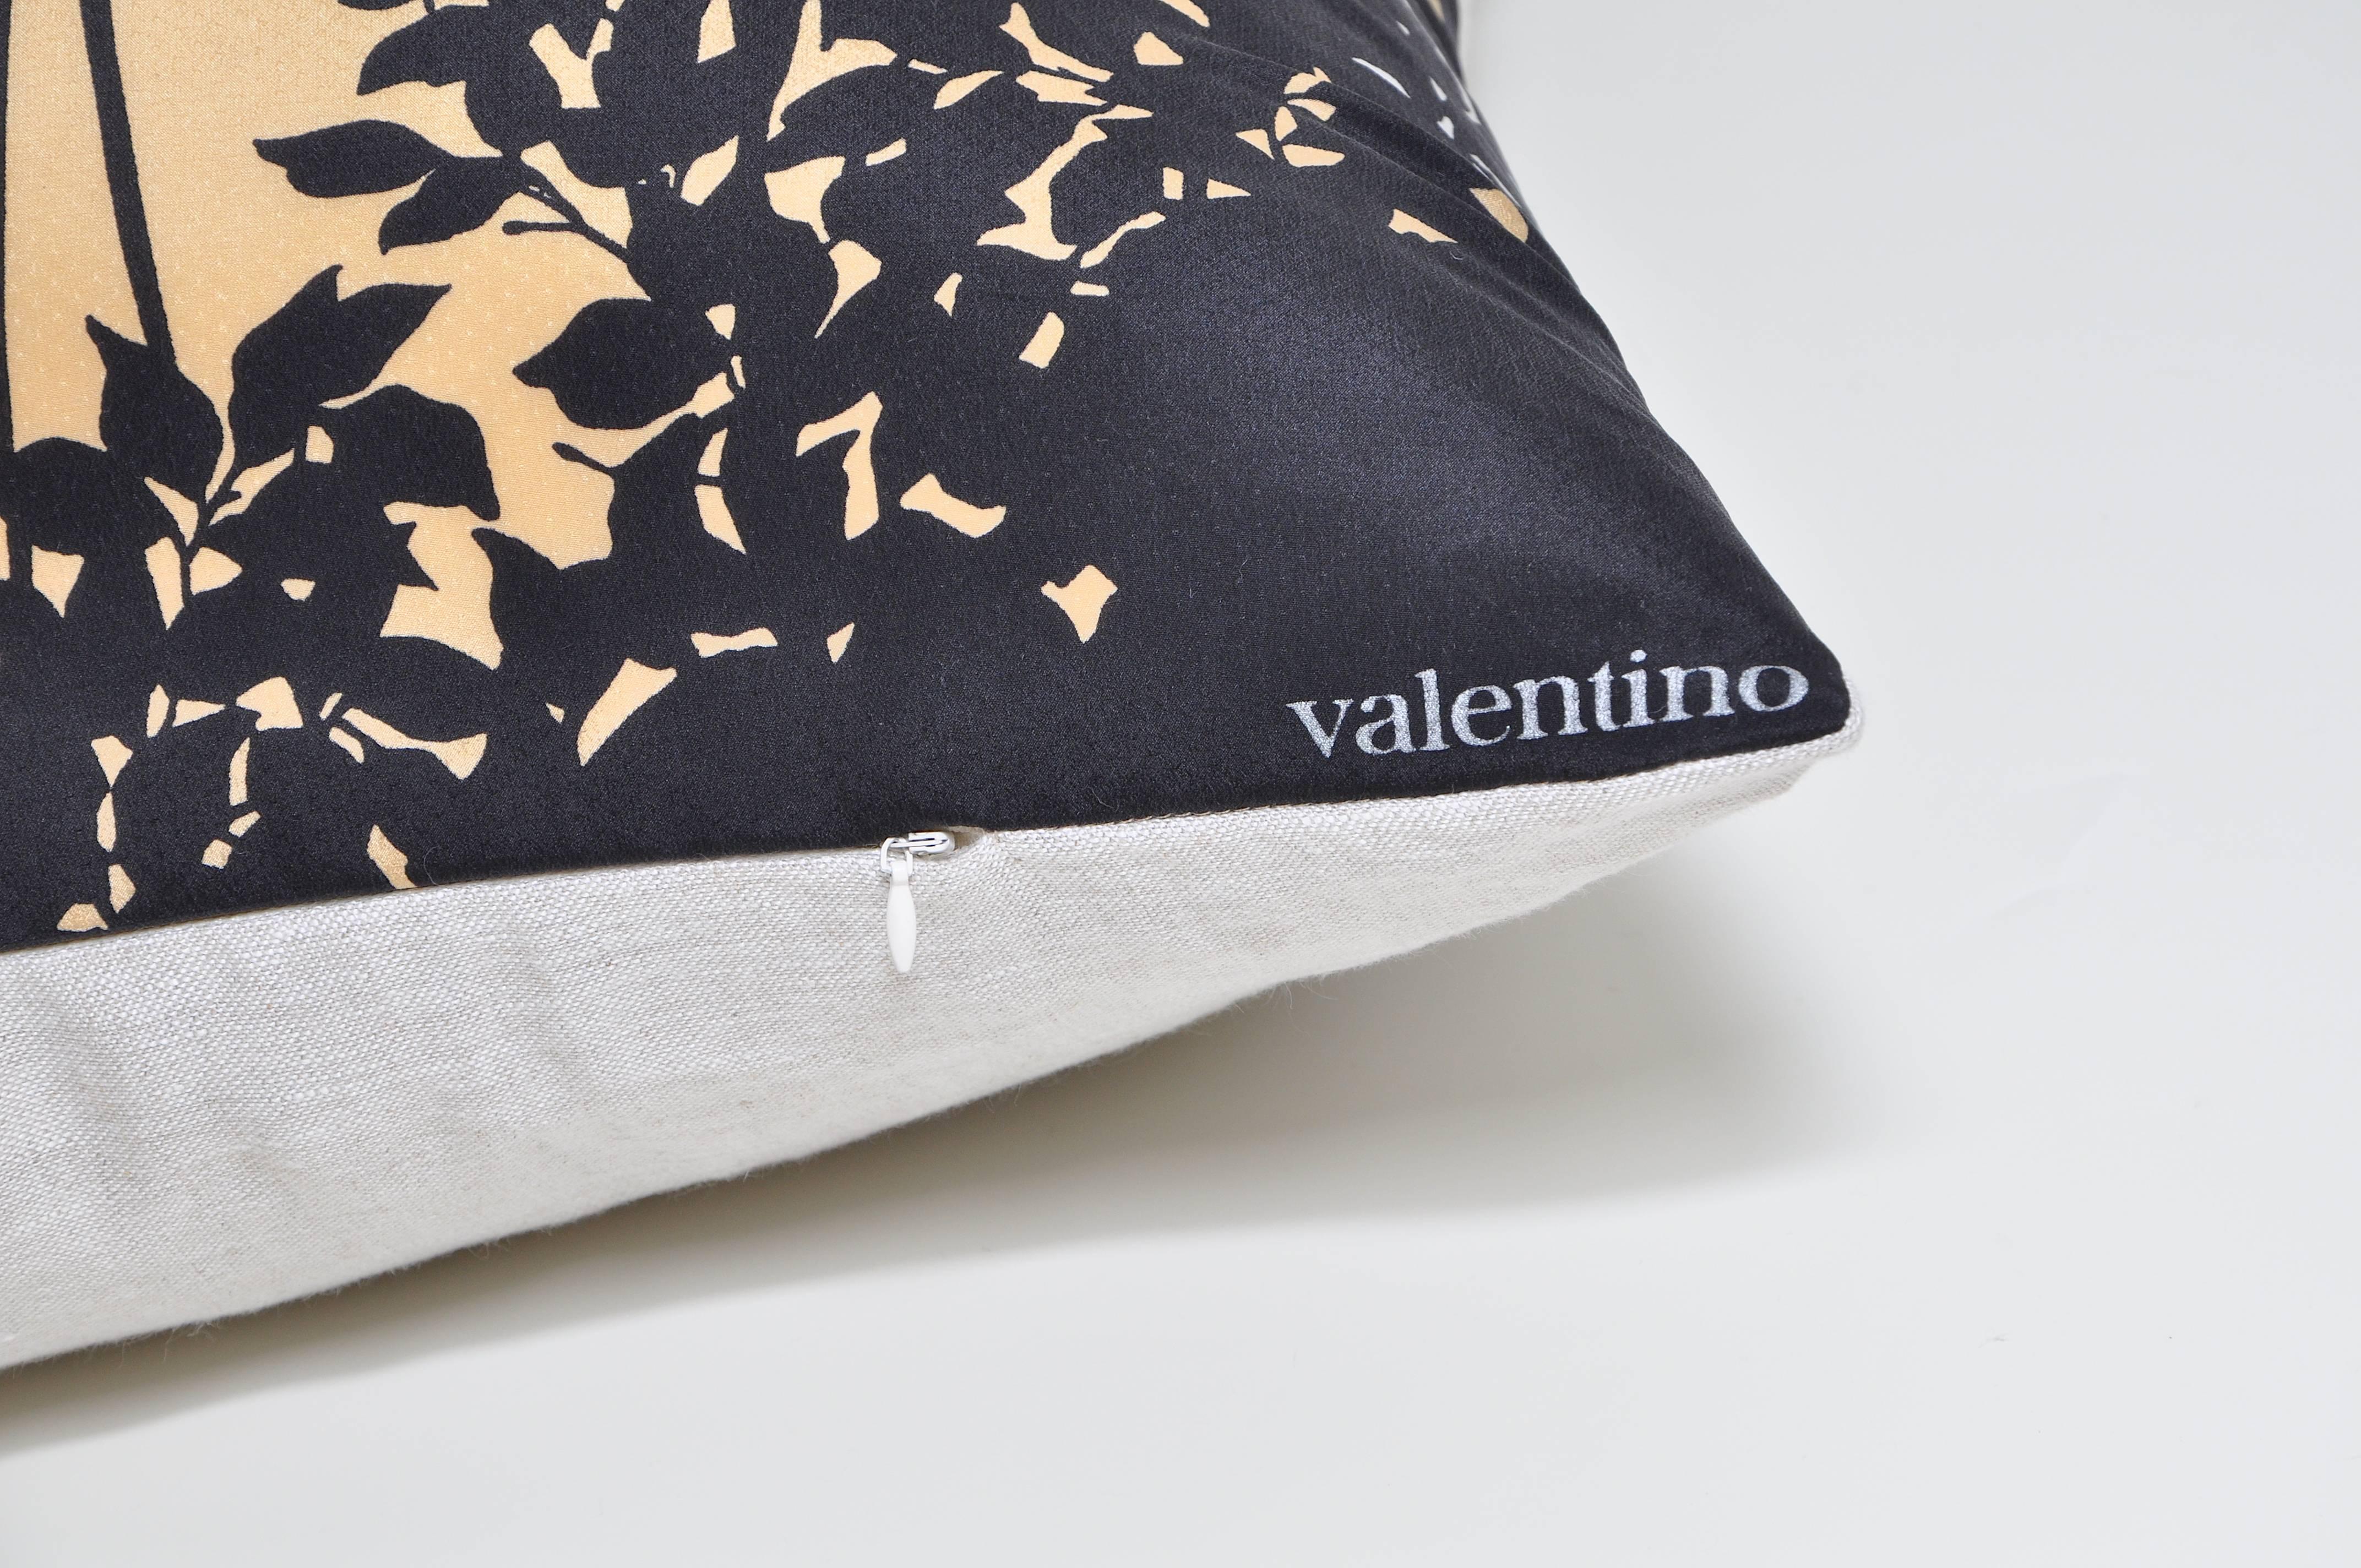 This cushion is a one-of-a-kind and part of a sustainability project. 
It has been created from an up-cycled, recycled luxury fabric, used with the intentions of promoting a more eco-friendly environment by using already existing materials. We both